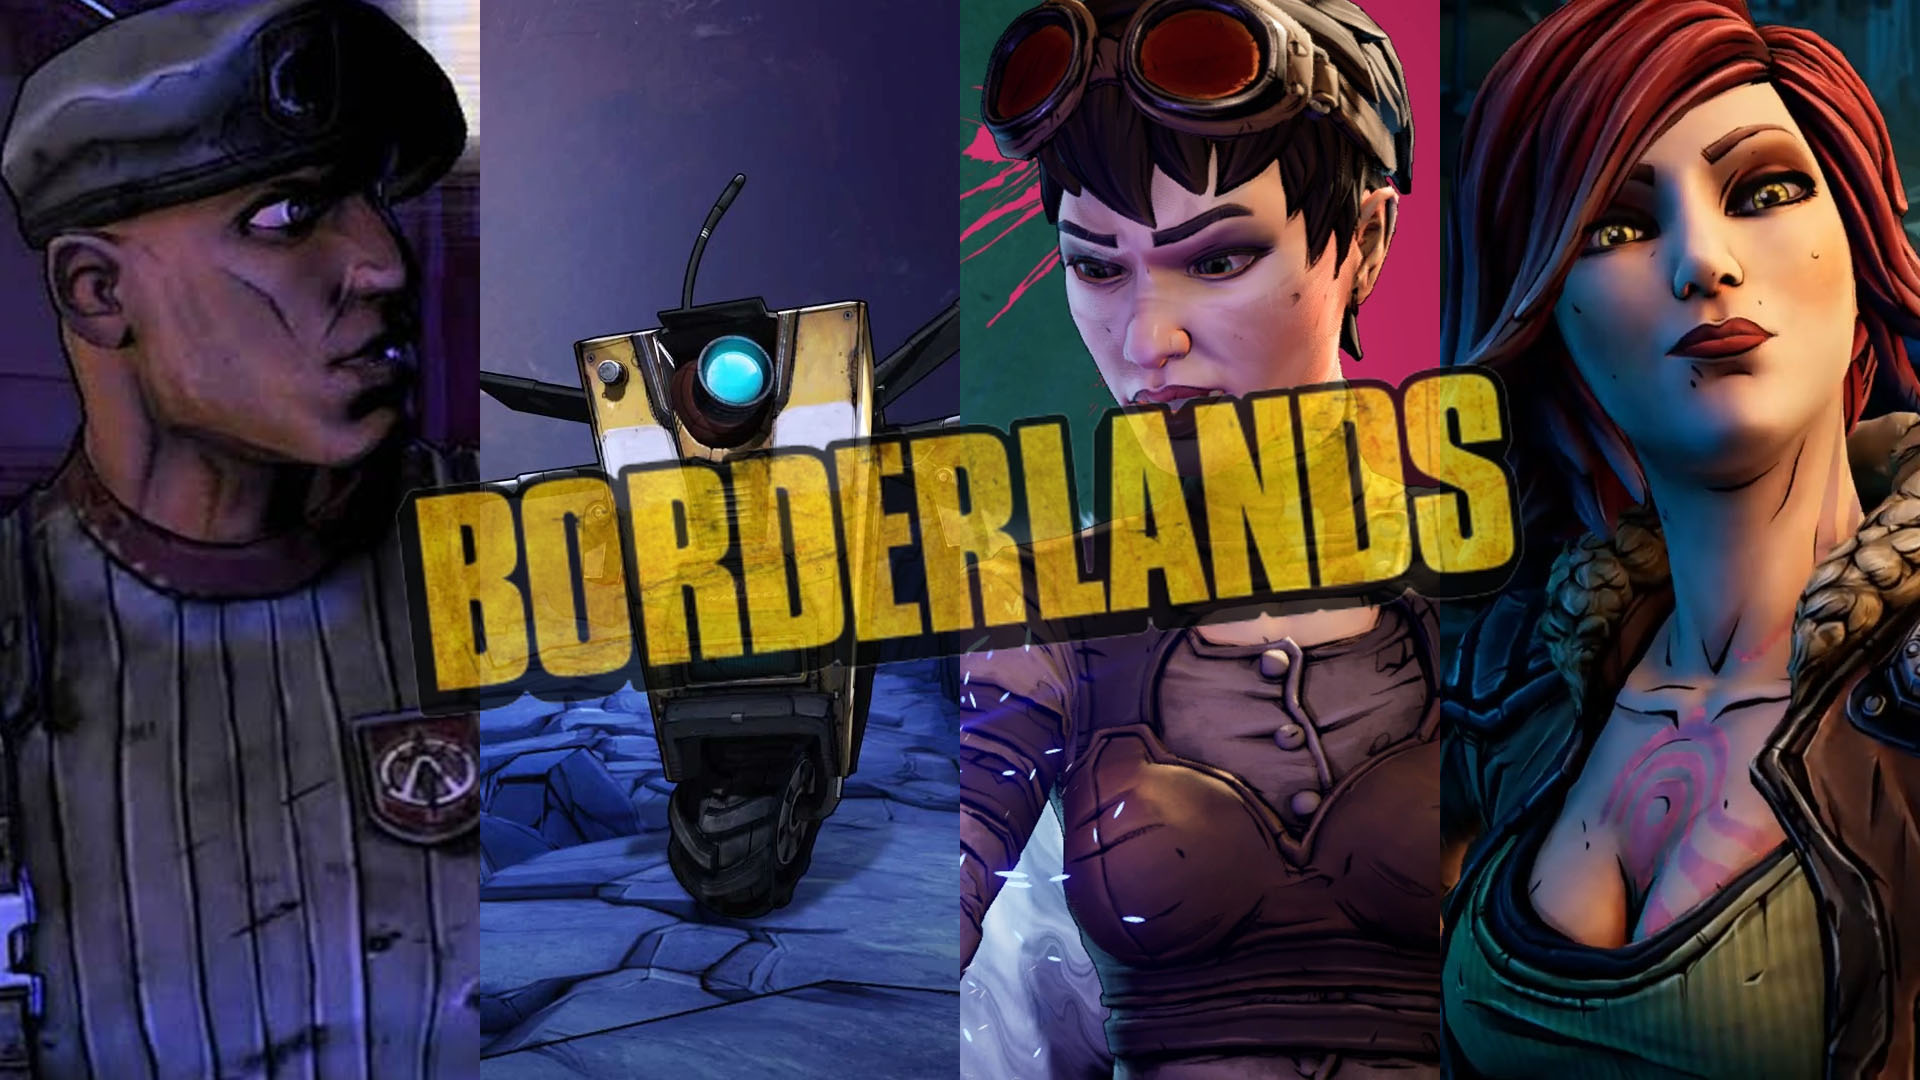 Official Borderlands New Movie Wallpapers